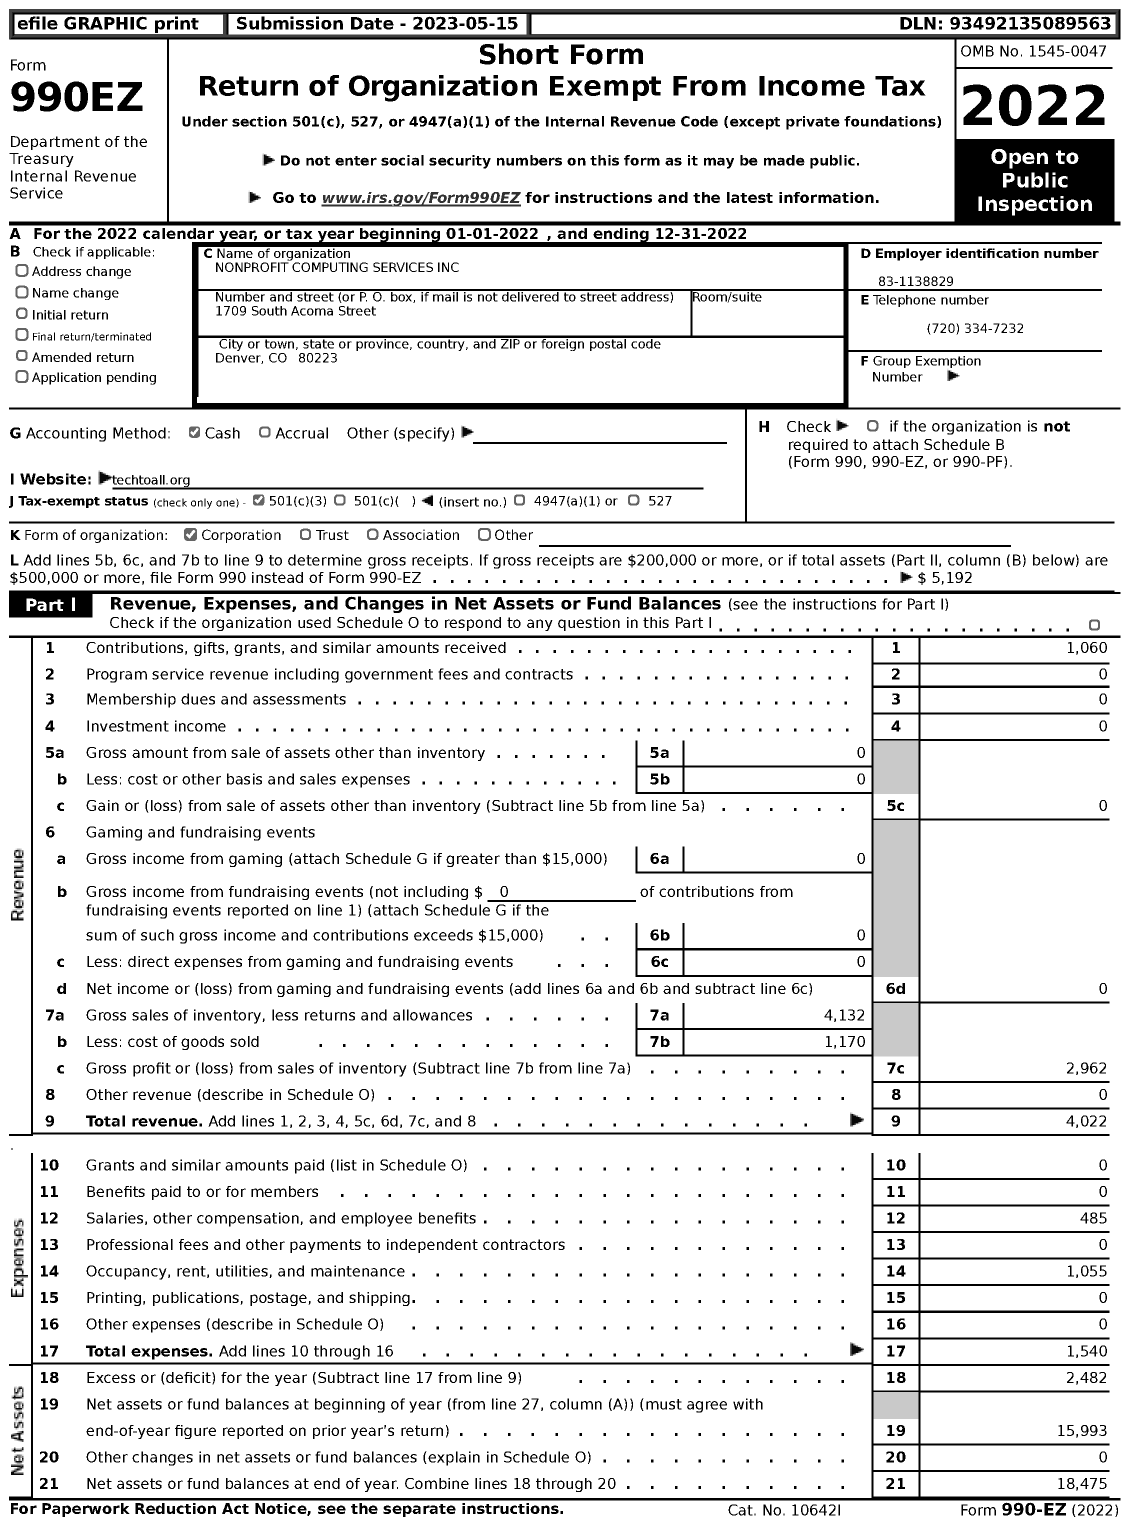 Image of first page of 2022 Form 990EZ for Nonprofit Computing Services